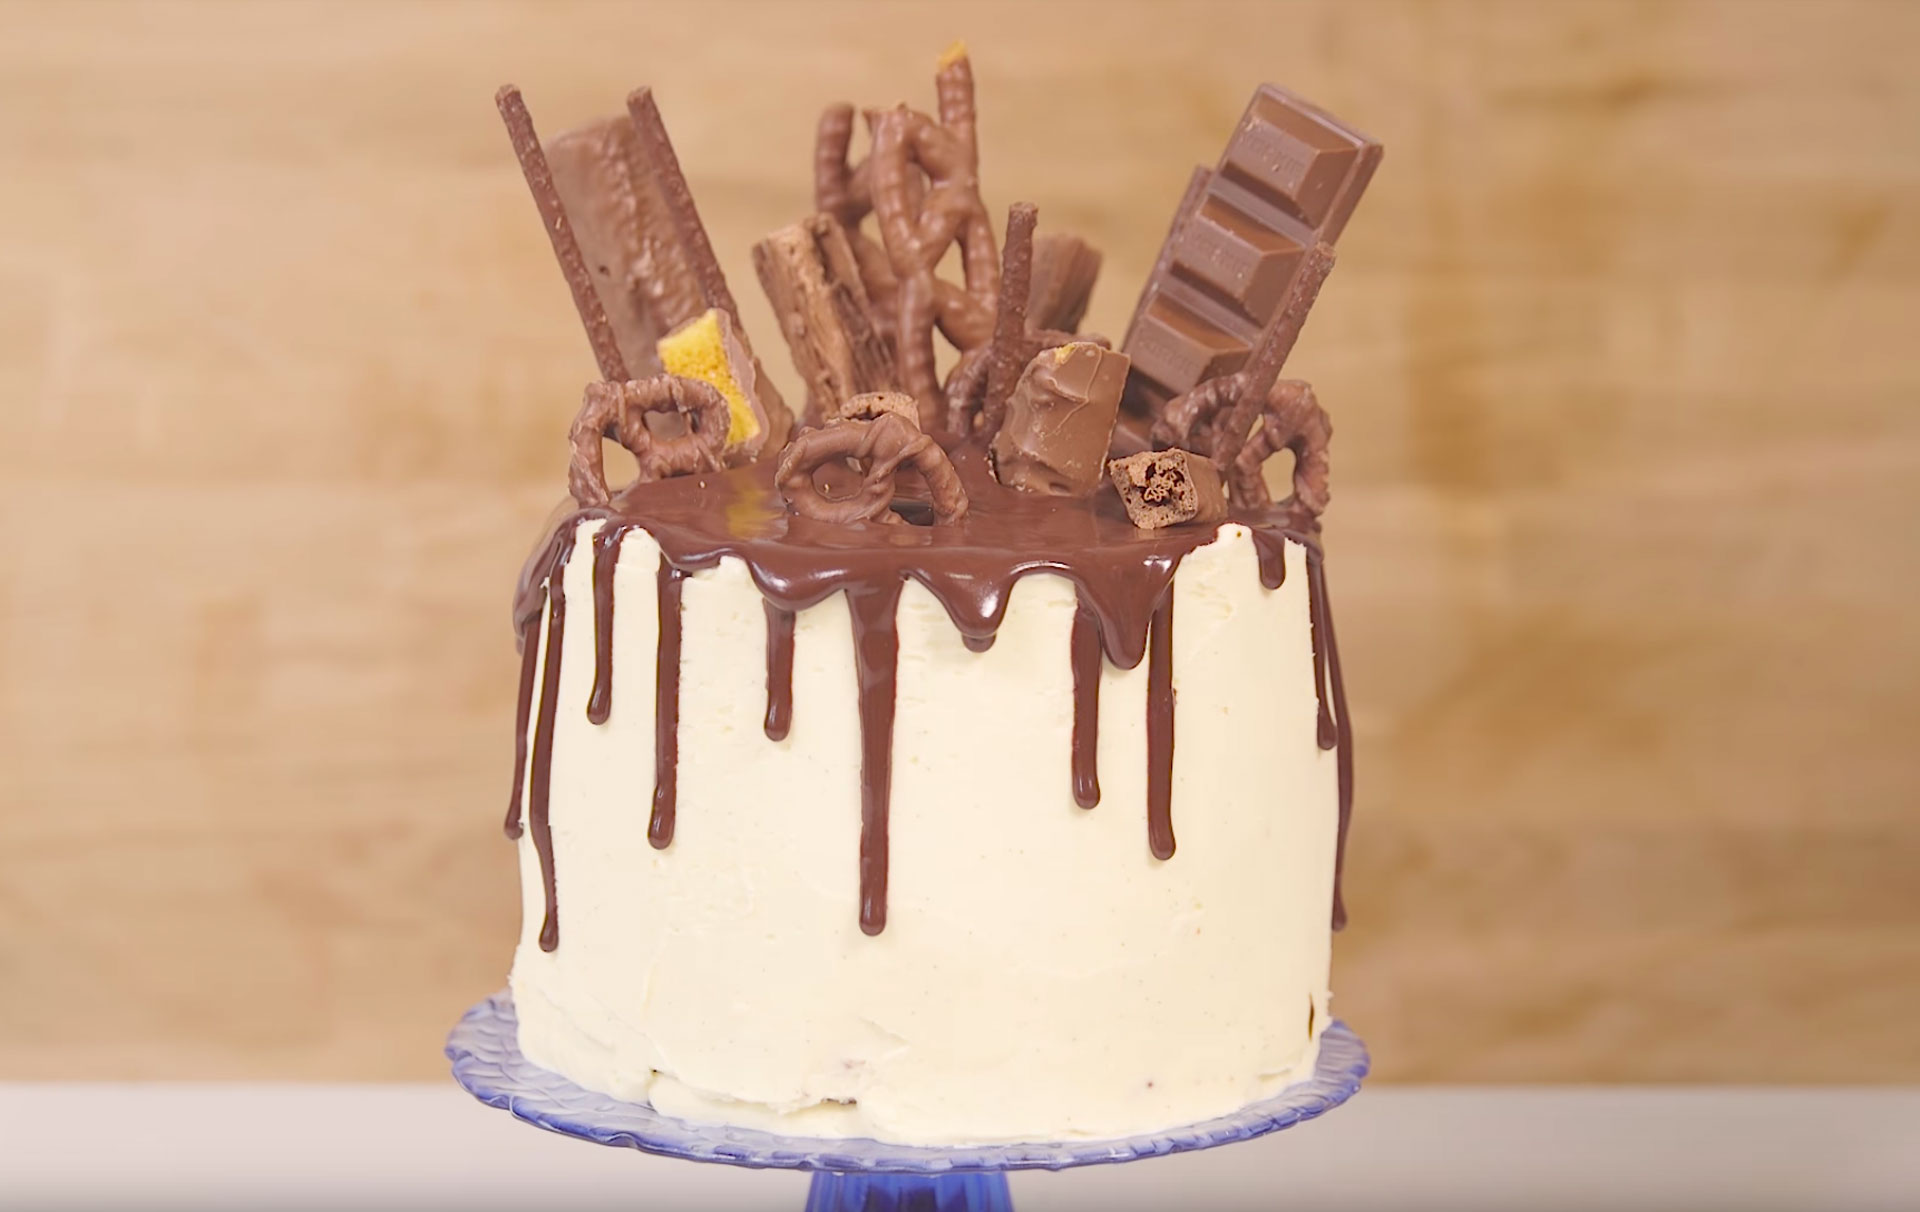 Chocolate drip cake recipe - with step-by-step video | Baking ...